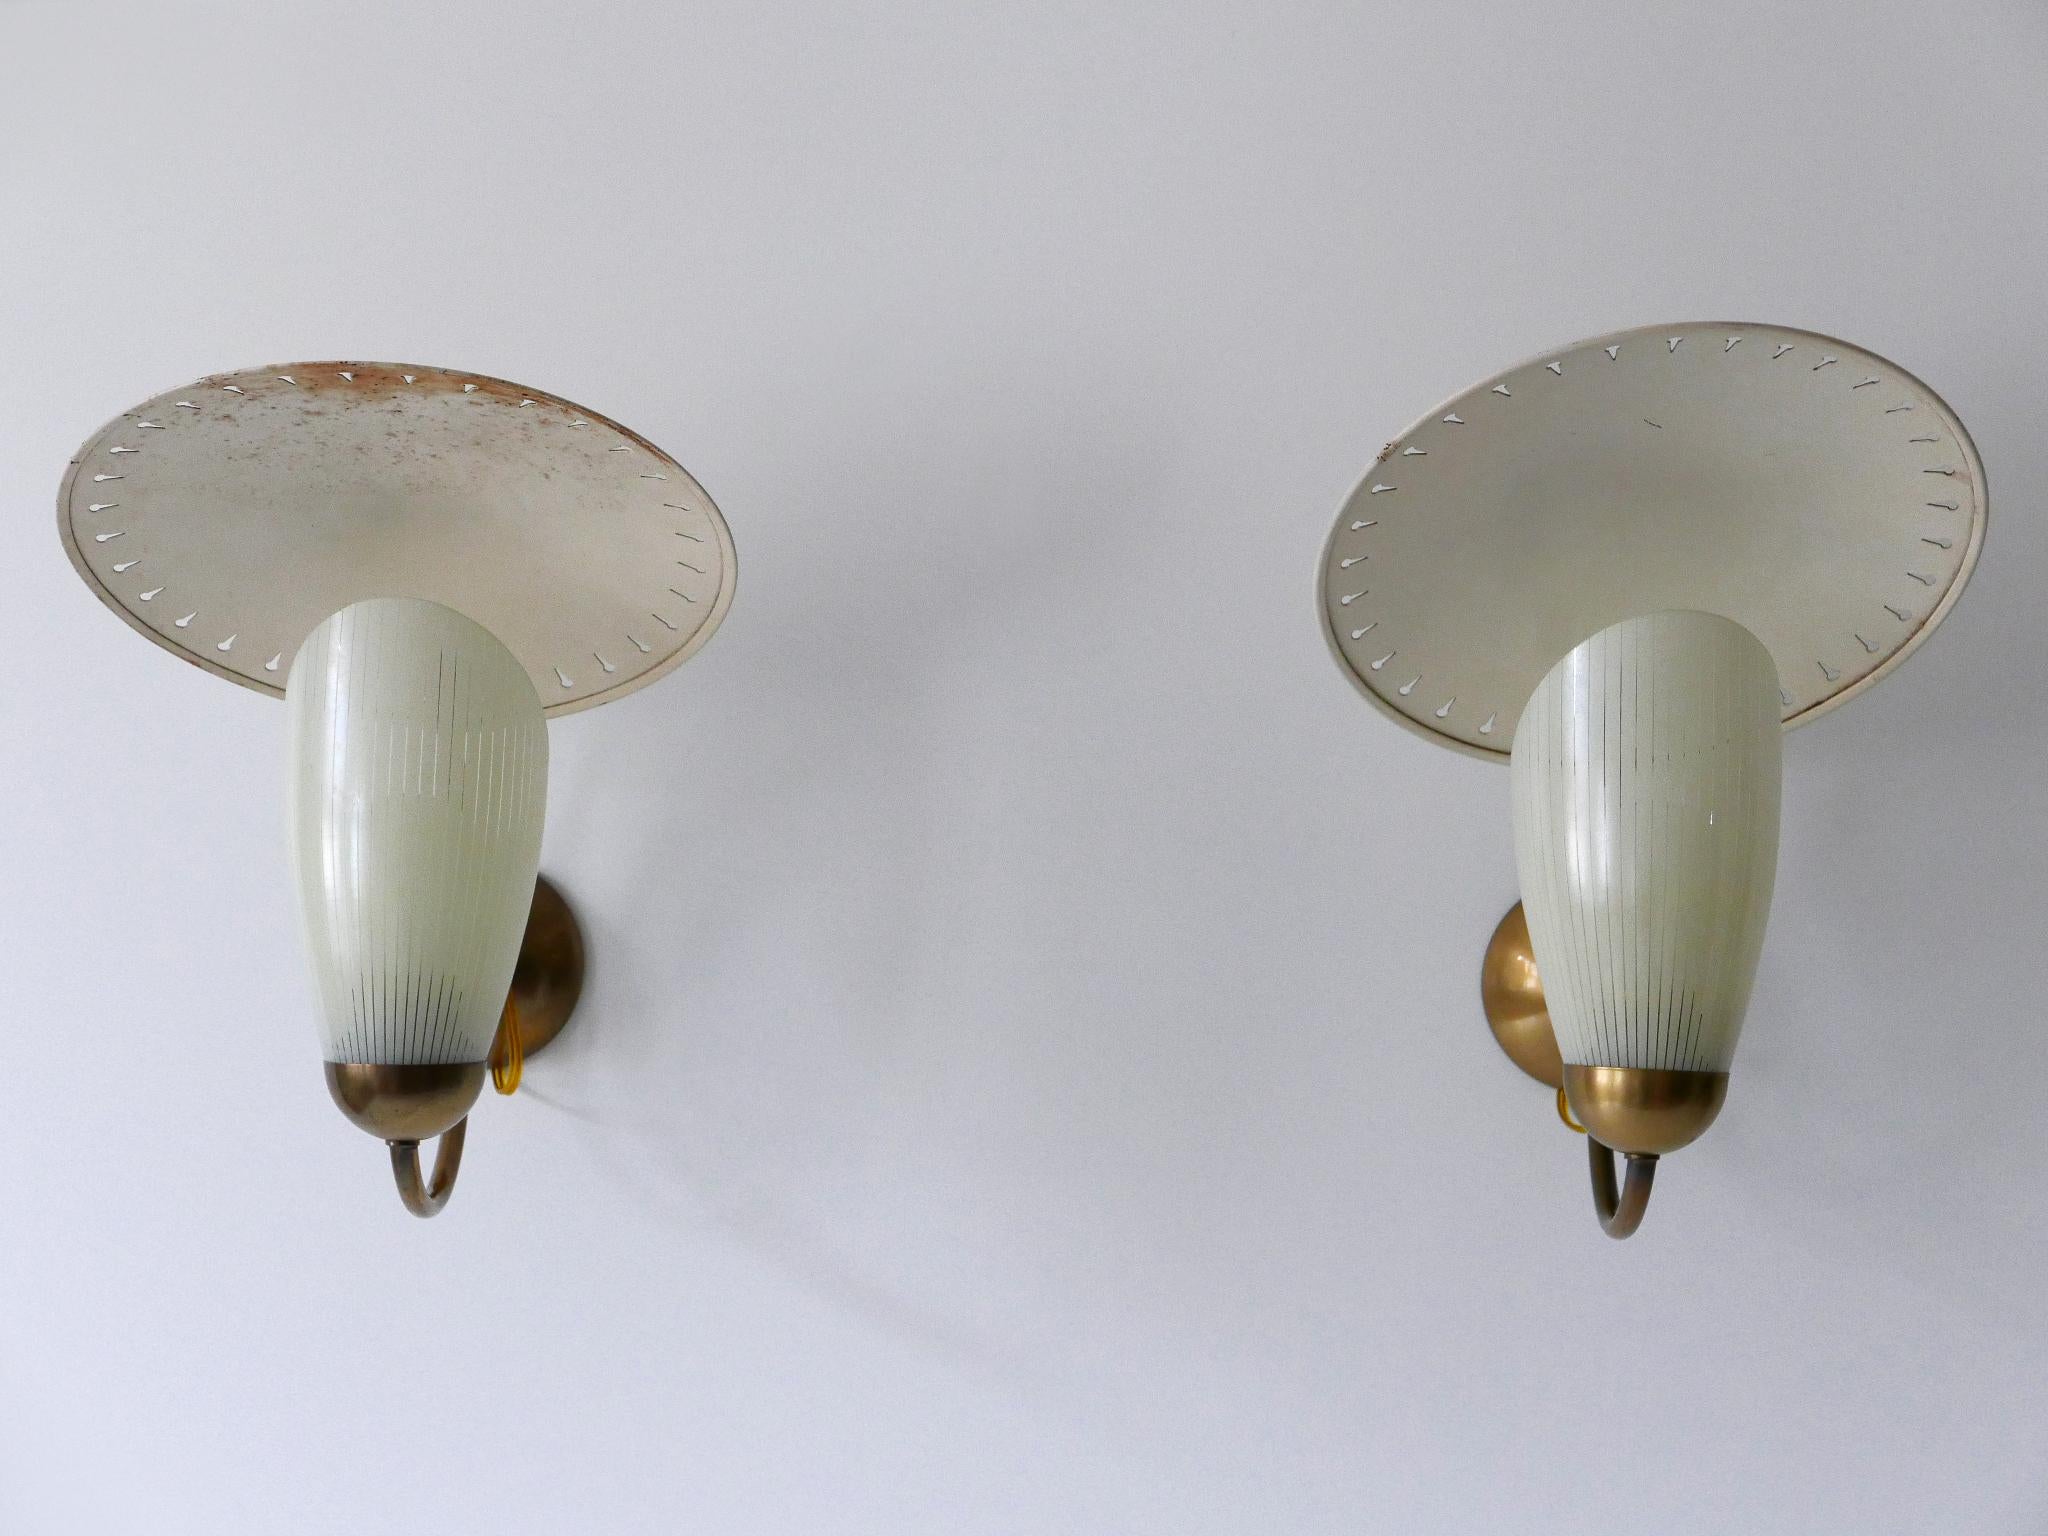 Set of two extremely rare and highly decorative Mid-Century Modern sputnik sconces or wall lights. Designed and manufactured in Germany, 1950s.

Executed in enameled metal and brass; each sconce needs 1 x E27 / E26 Edison screw fit bulb. The